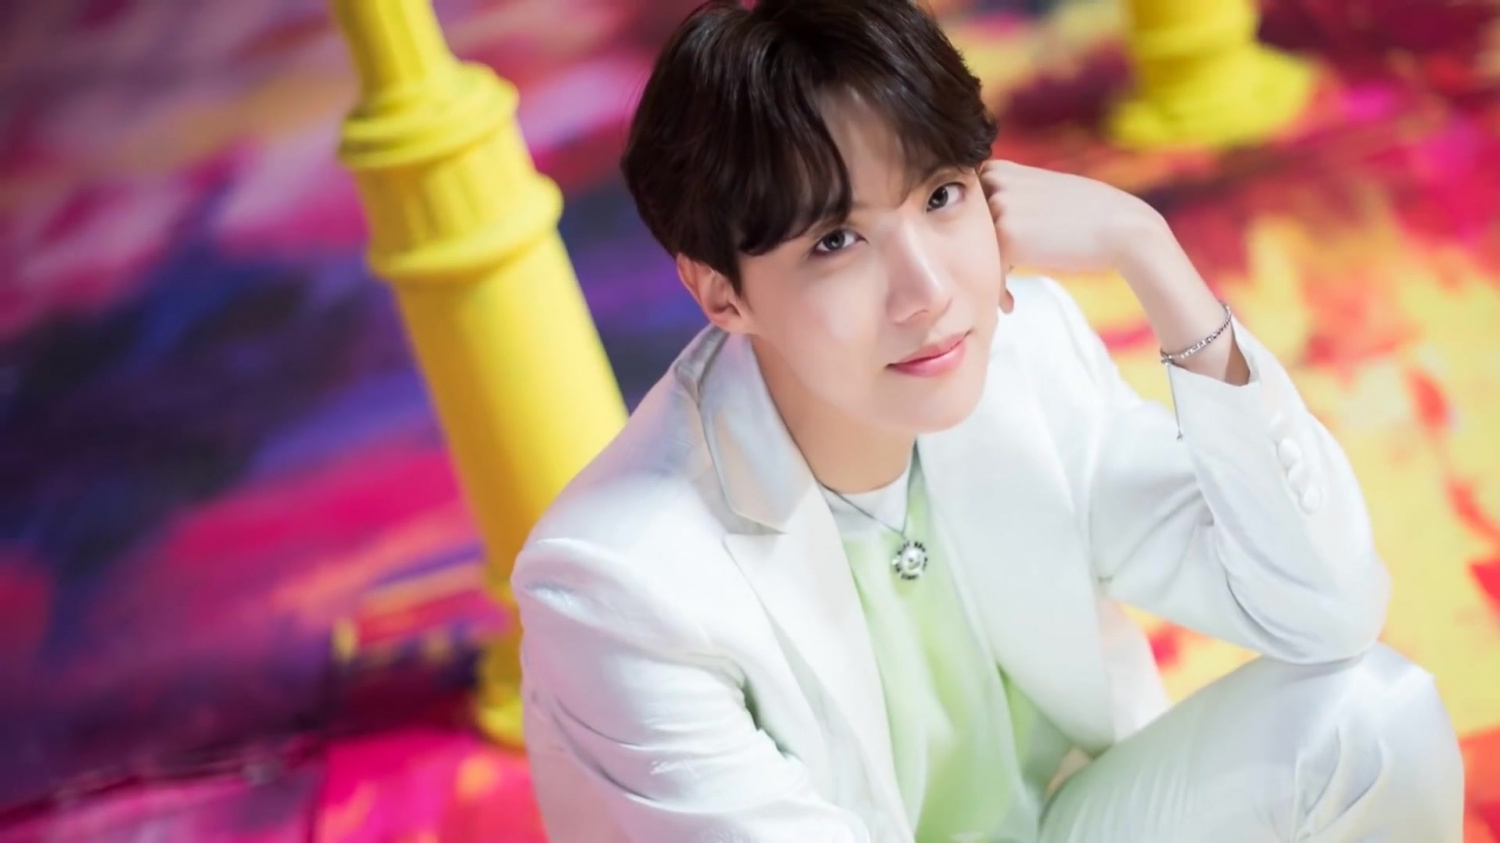 J-Hope's Blue Hair in "Boy With Luv" Music Video - wide 8